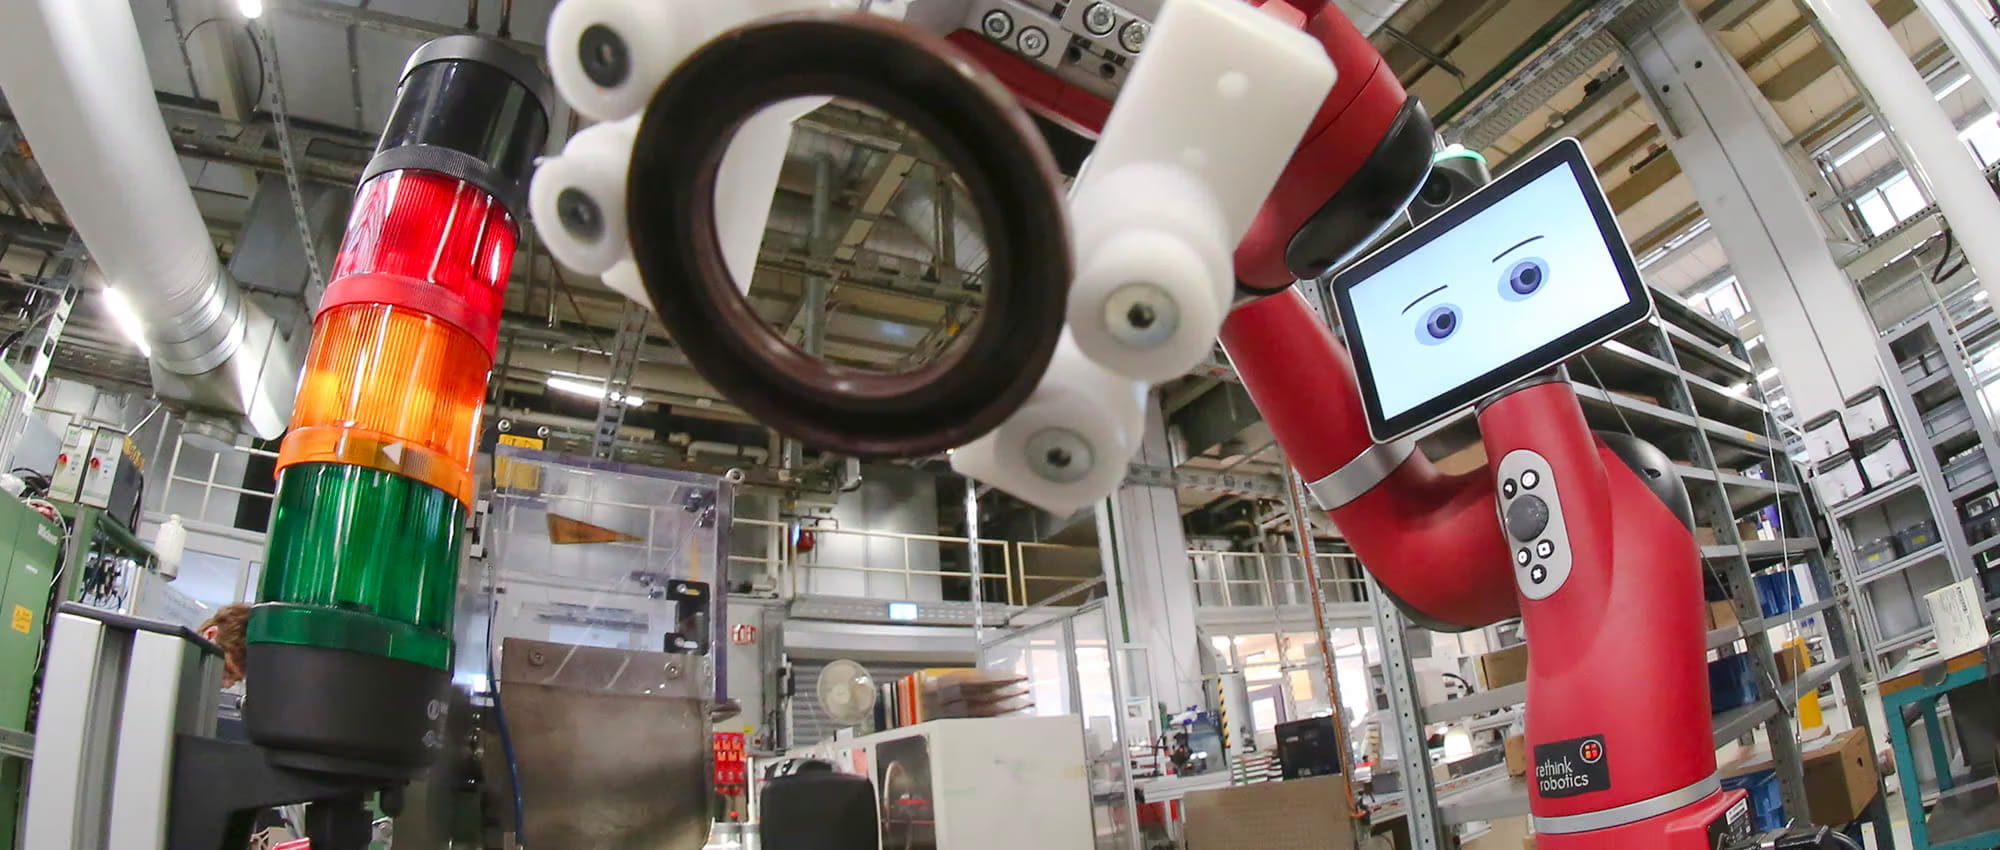 Friendly Cobot at Freudenberg Sealing Technologies production site